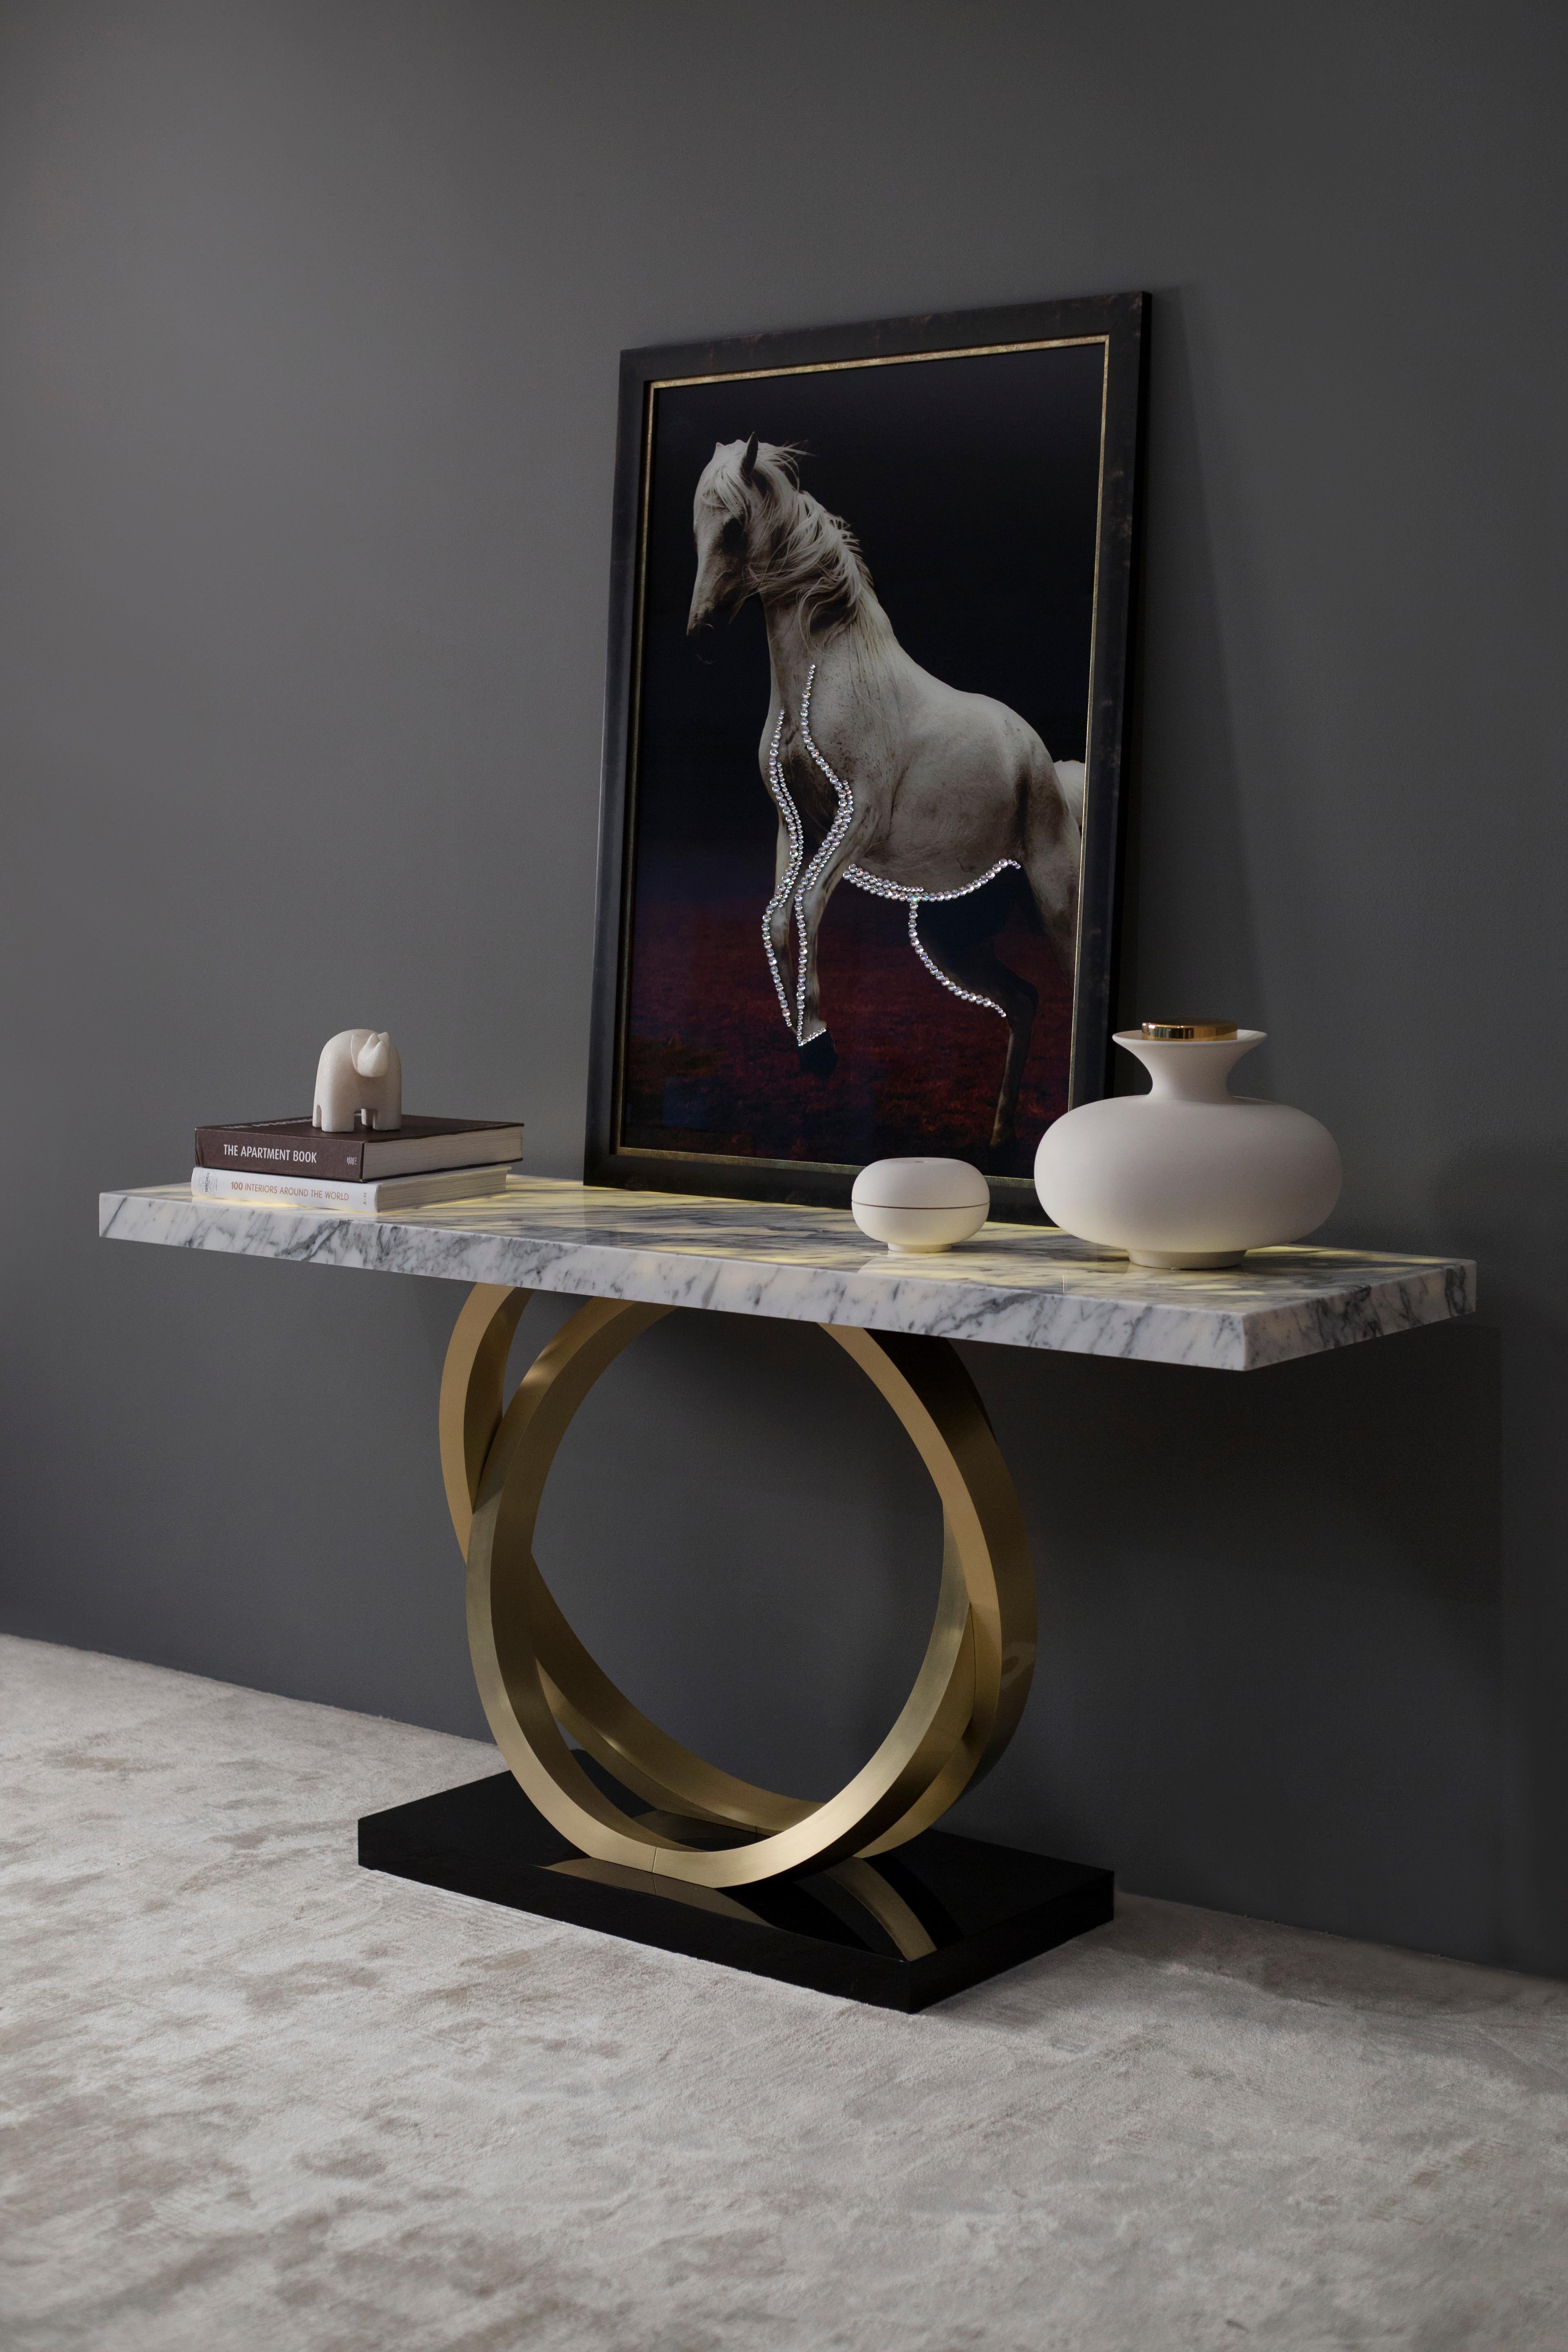 Armilar Console Table, Modern Collection, Handcrafted in Portugal - Europe by GF Modern.

The Armilar console table has a modern design that pays homage to the Portuguese armillary sphere, an instrument that allowed Portuguese navigators to sail